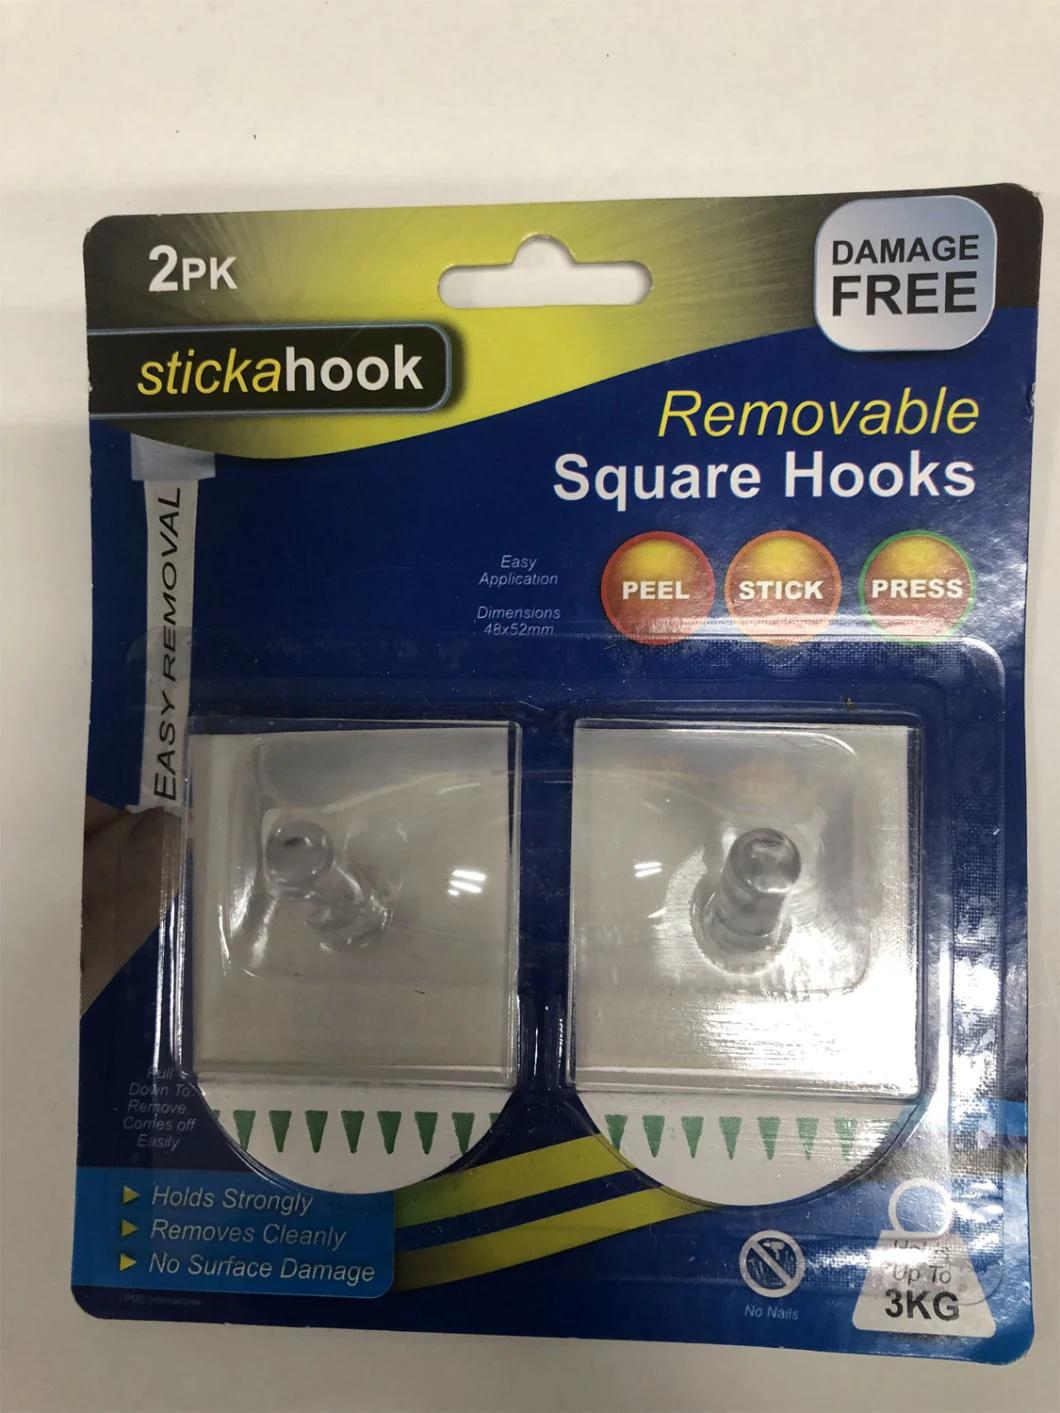 4 Mobile and Rotatable Square Plastic Hooks for Household Use